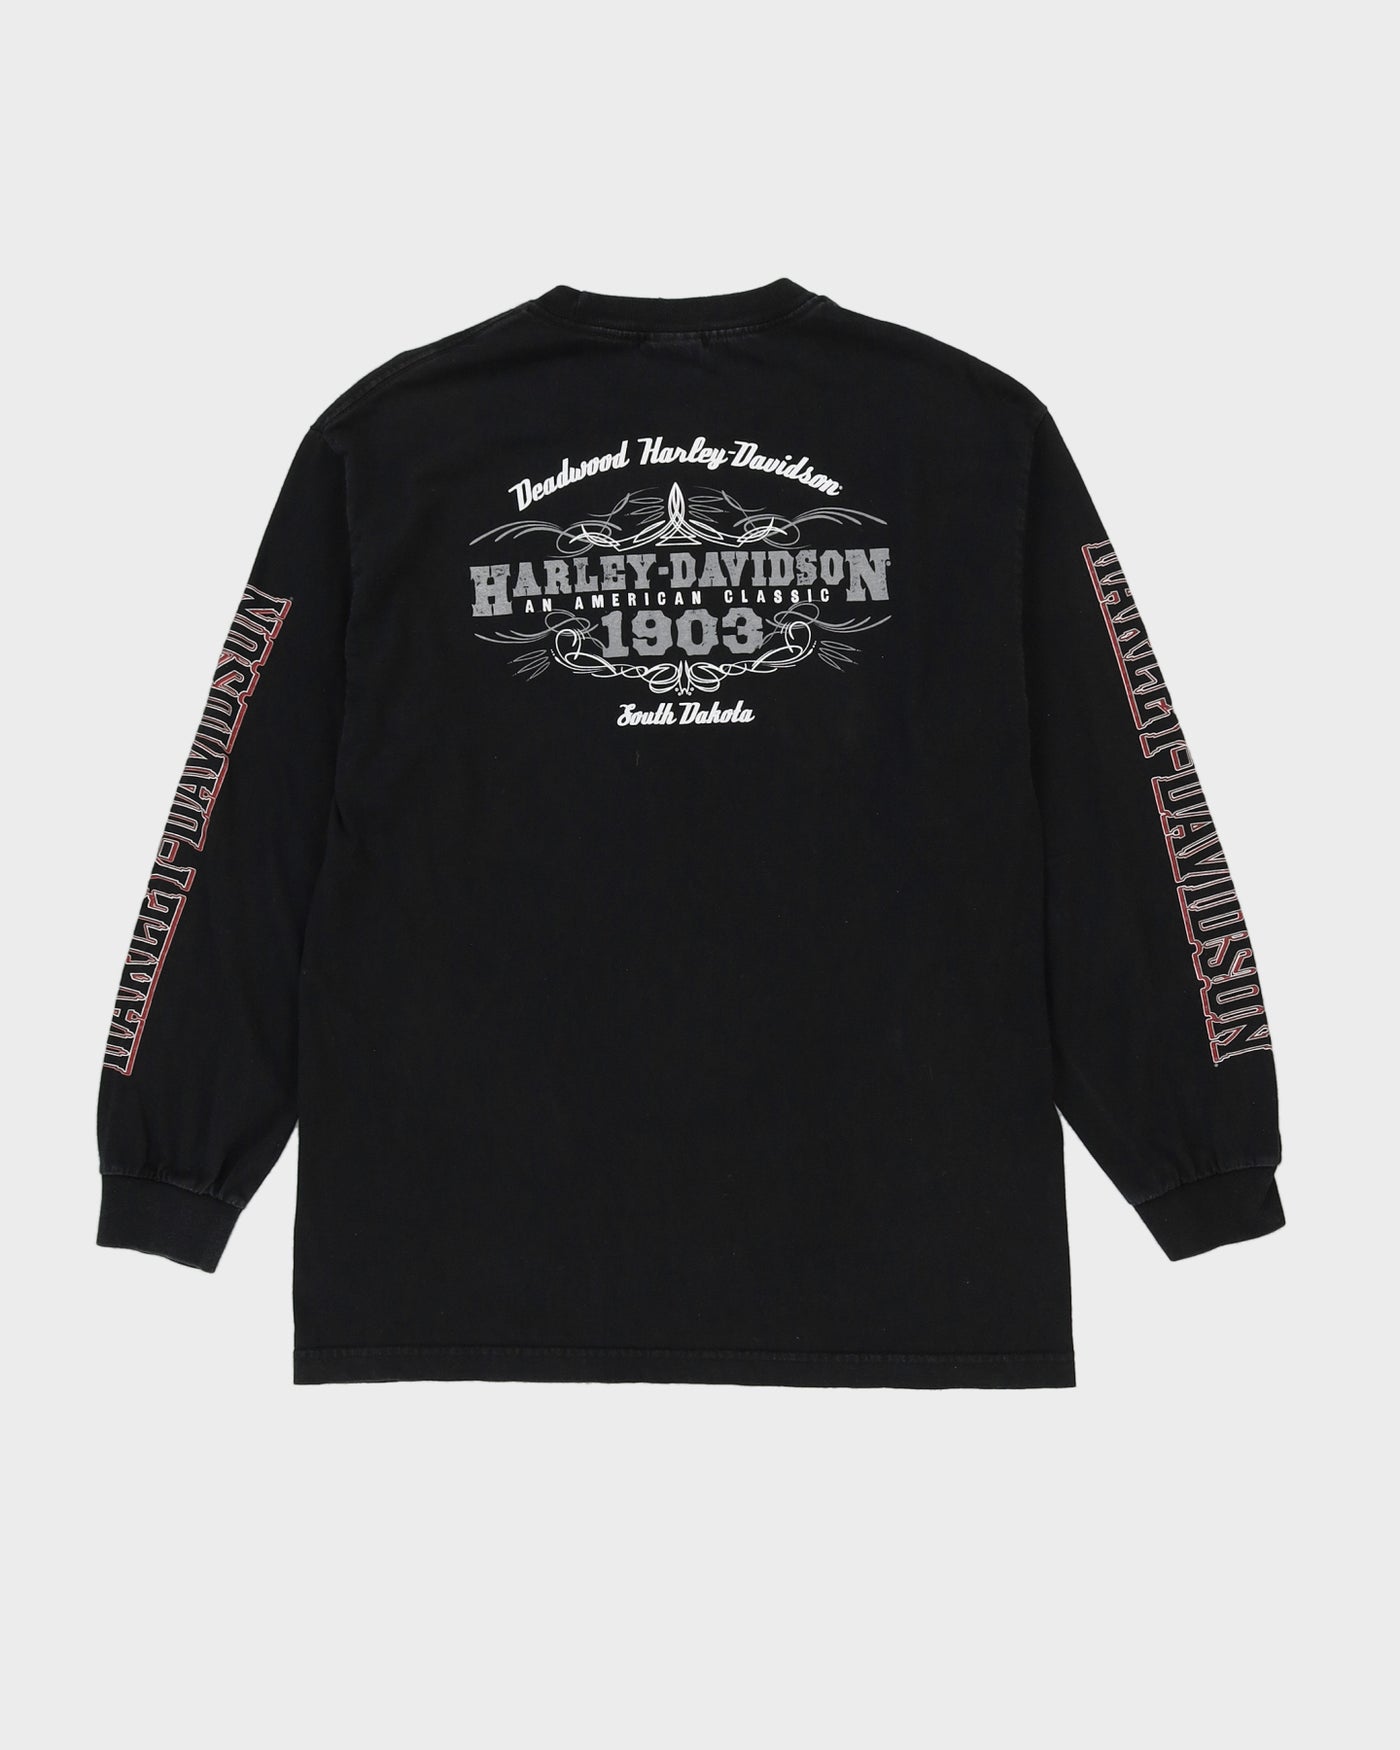 00s Harley Davidson "Live To Ride, Ride To Live" Black Long Sleeved T-shirt - L